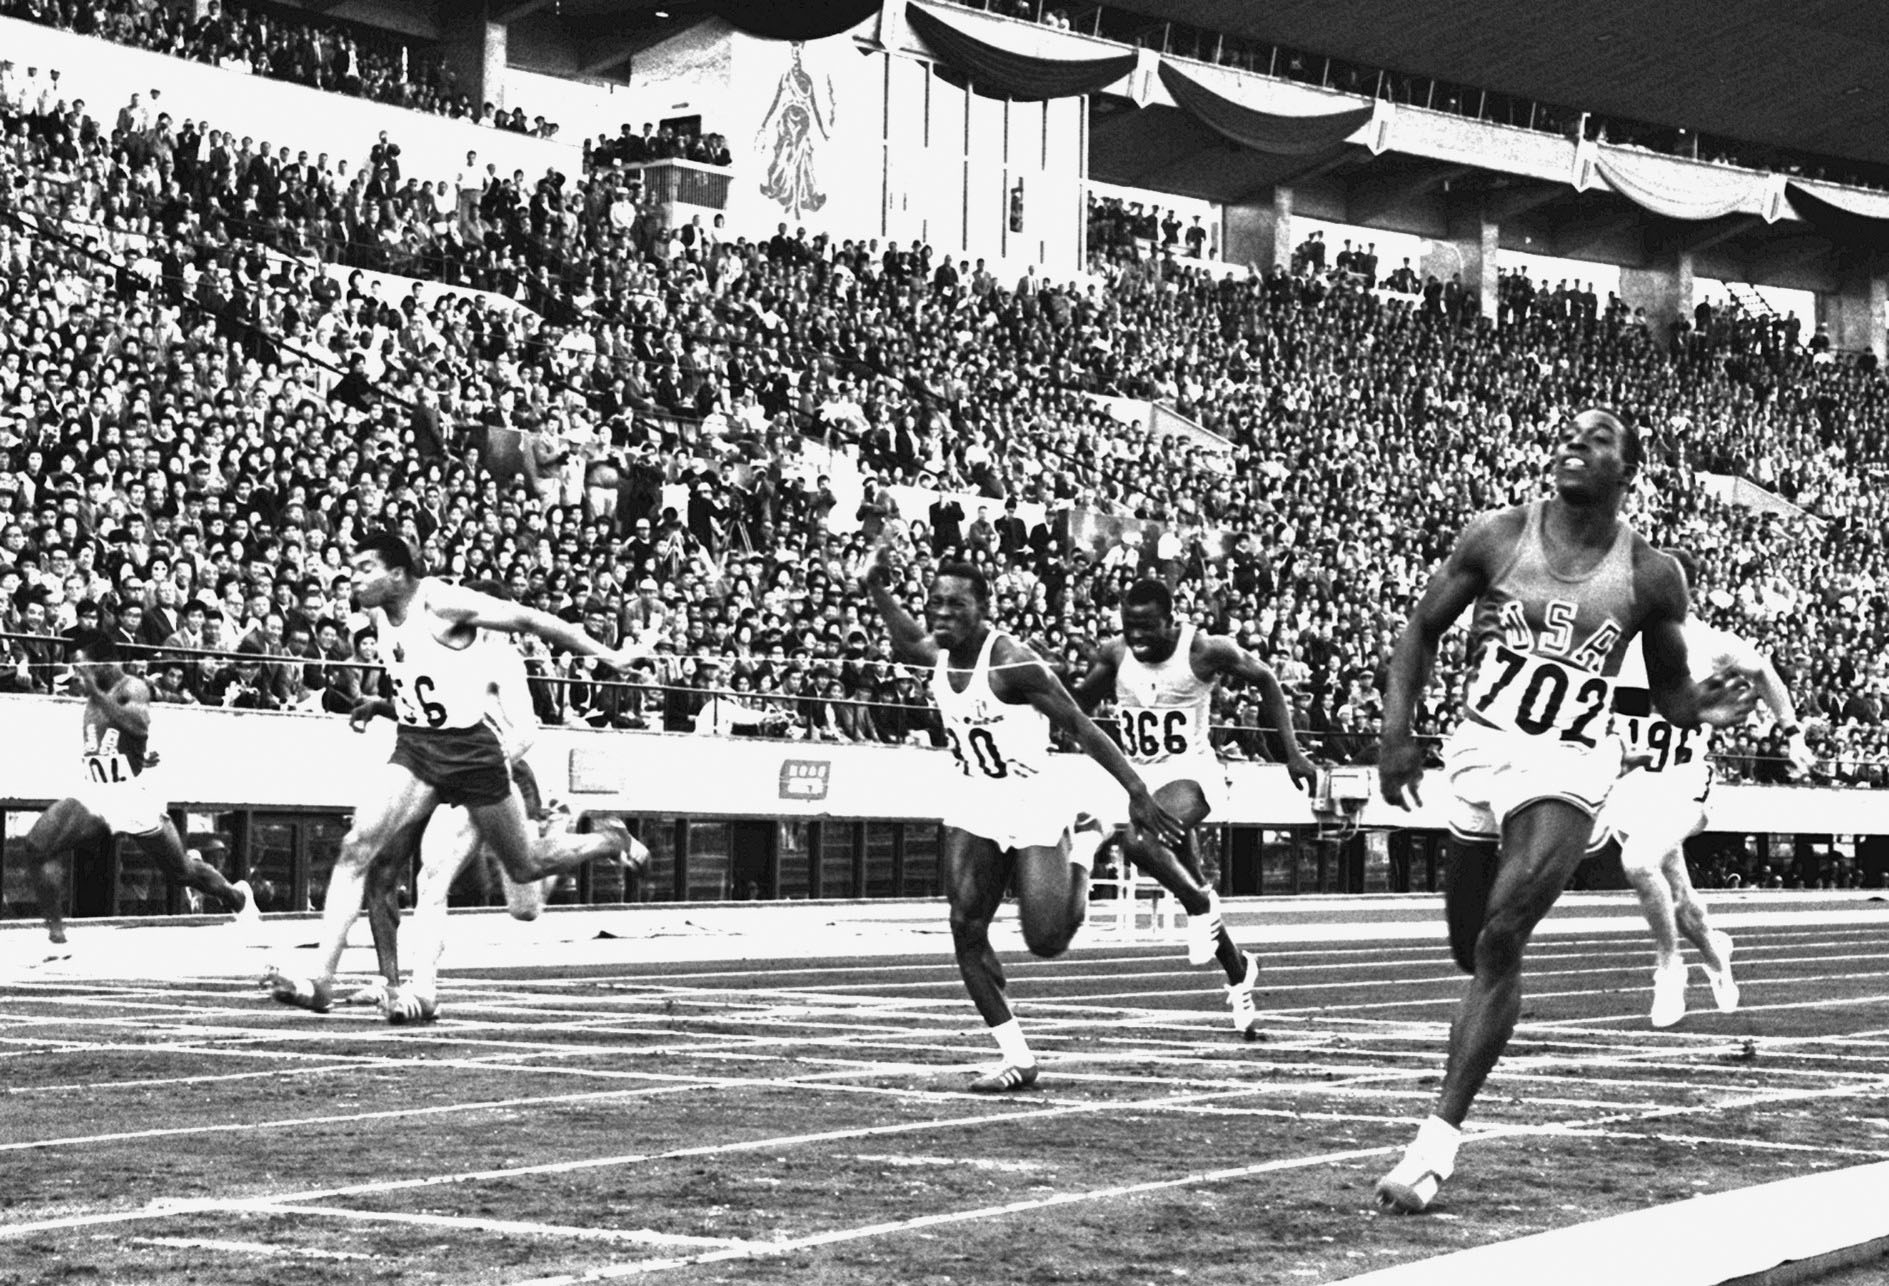 Remarkable speed: American Bob Hayes (right), a future NFL star, finished first in the 100-meter final at the 1964 Tokyo Olympics in 10.0 seconds, tying a world record.  | KYODO